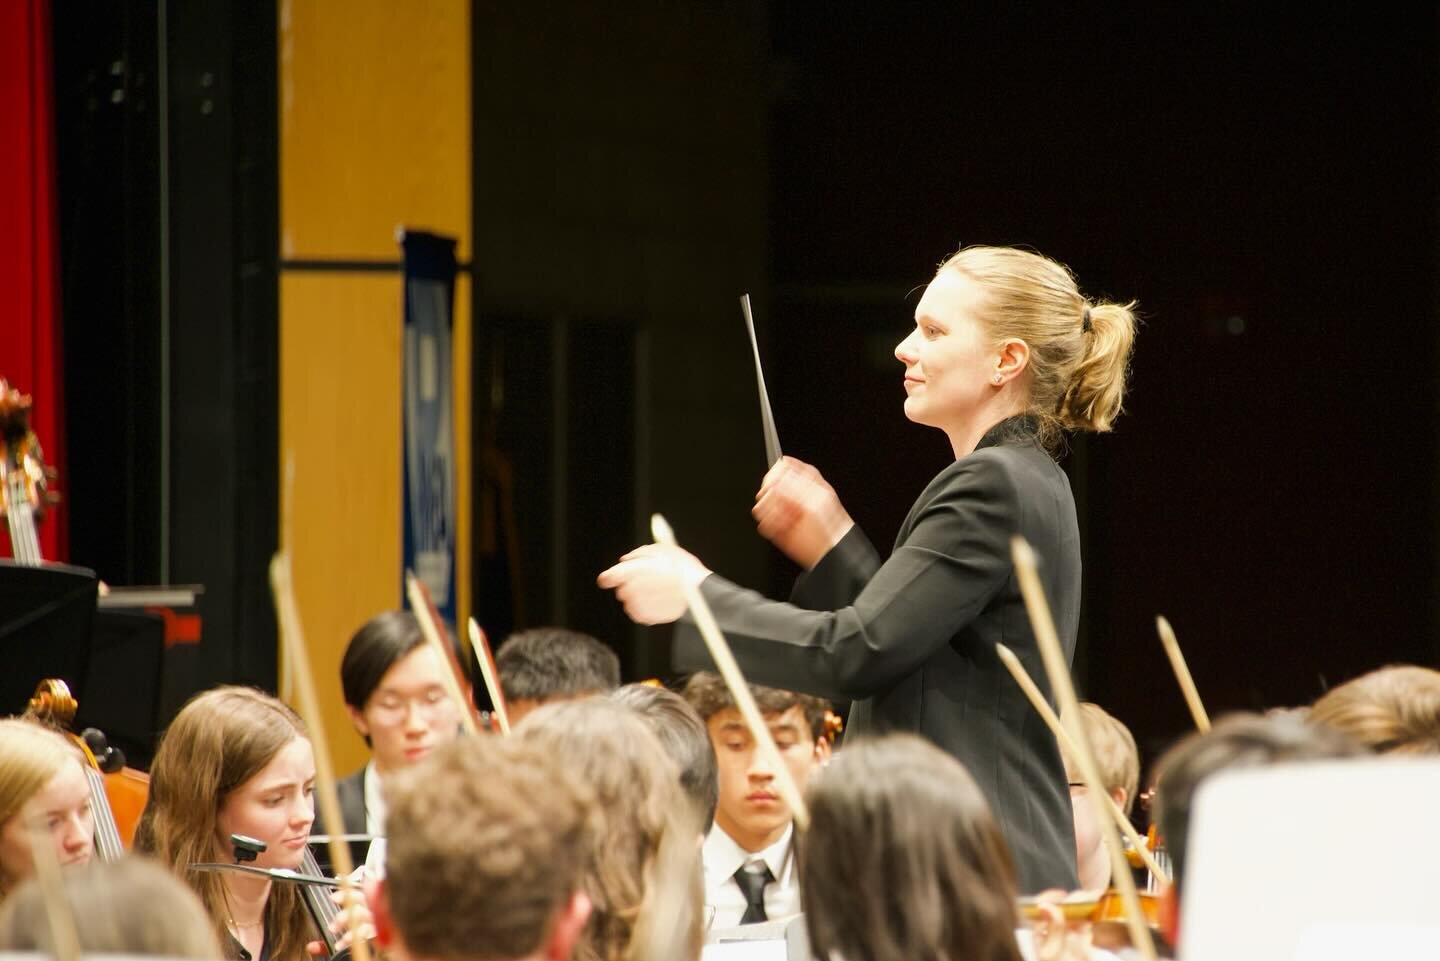 It was a honor to guest conduct the Pennsylvania Central Region Orchestra last week! 

Higdon: SkyLine from City Scape
Kodaly: Dances of Gal&aacute;nta
Rachmaninoff: Symphonic Dances

📷Nicholas Curry